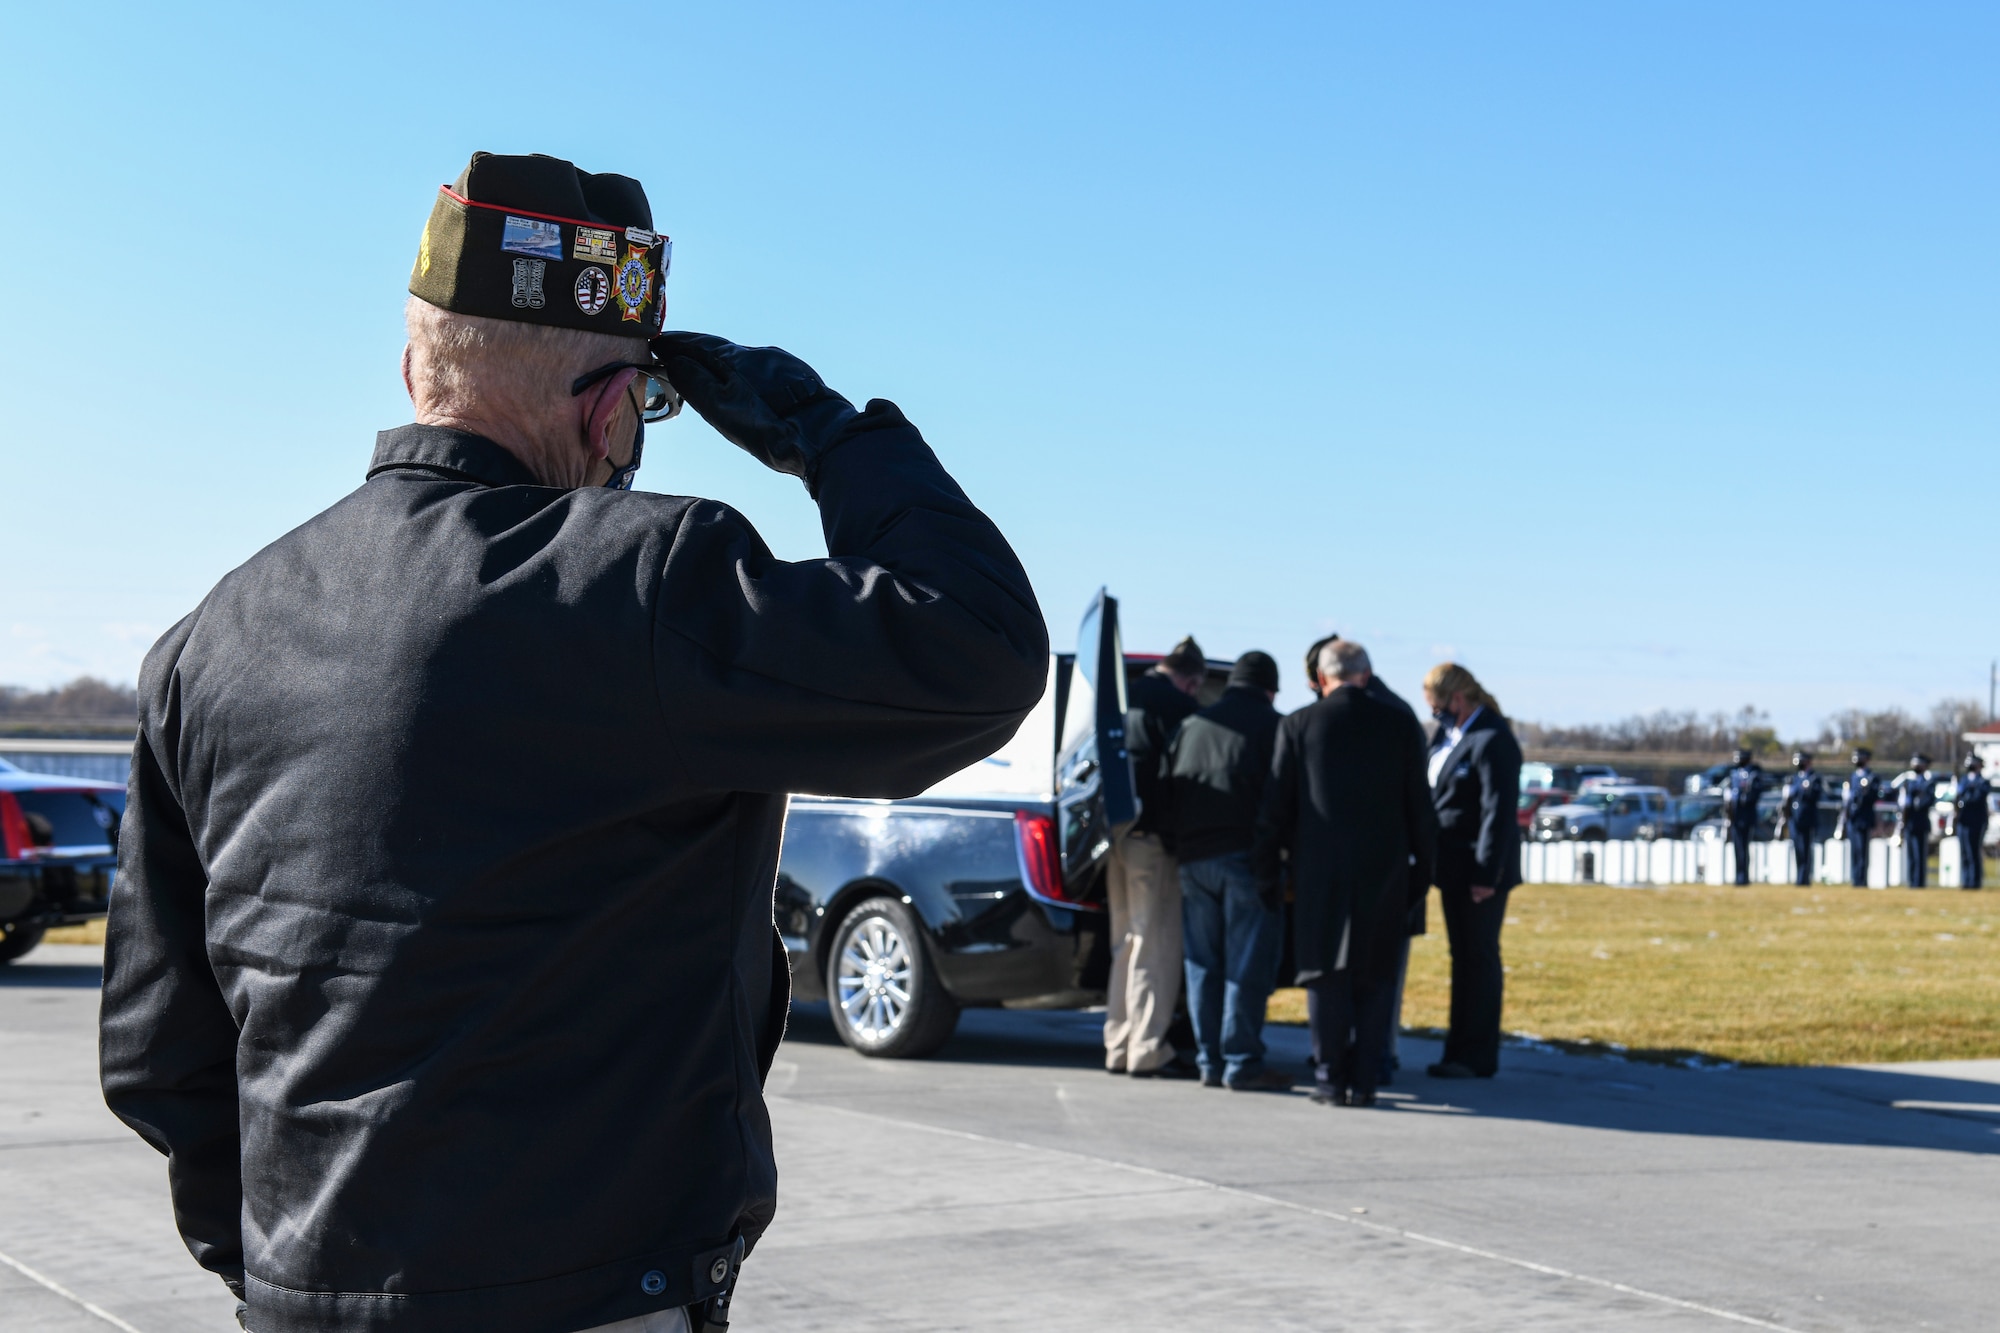 A veteran from the Fargo Veterans of Foreign Wars renders a salute to a fallen brother in arms Oct. 16, 2020, at the Fargo National Cemetary, N.D. Veterans from across the sate and many other supporters showed up to honor an unclaimed veteran. (U.S. Air Force photo by Ashley Richards)